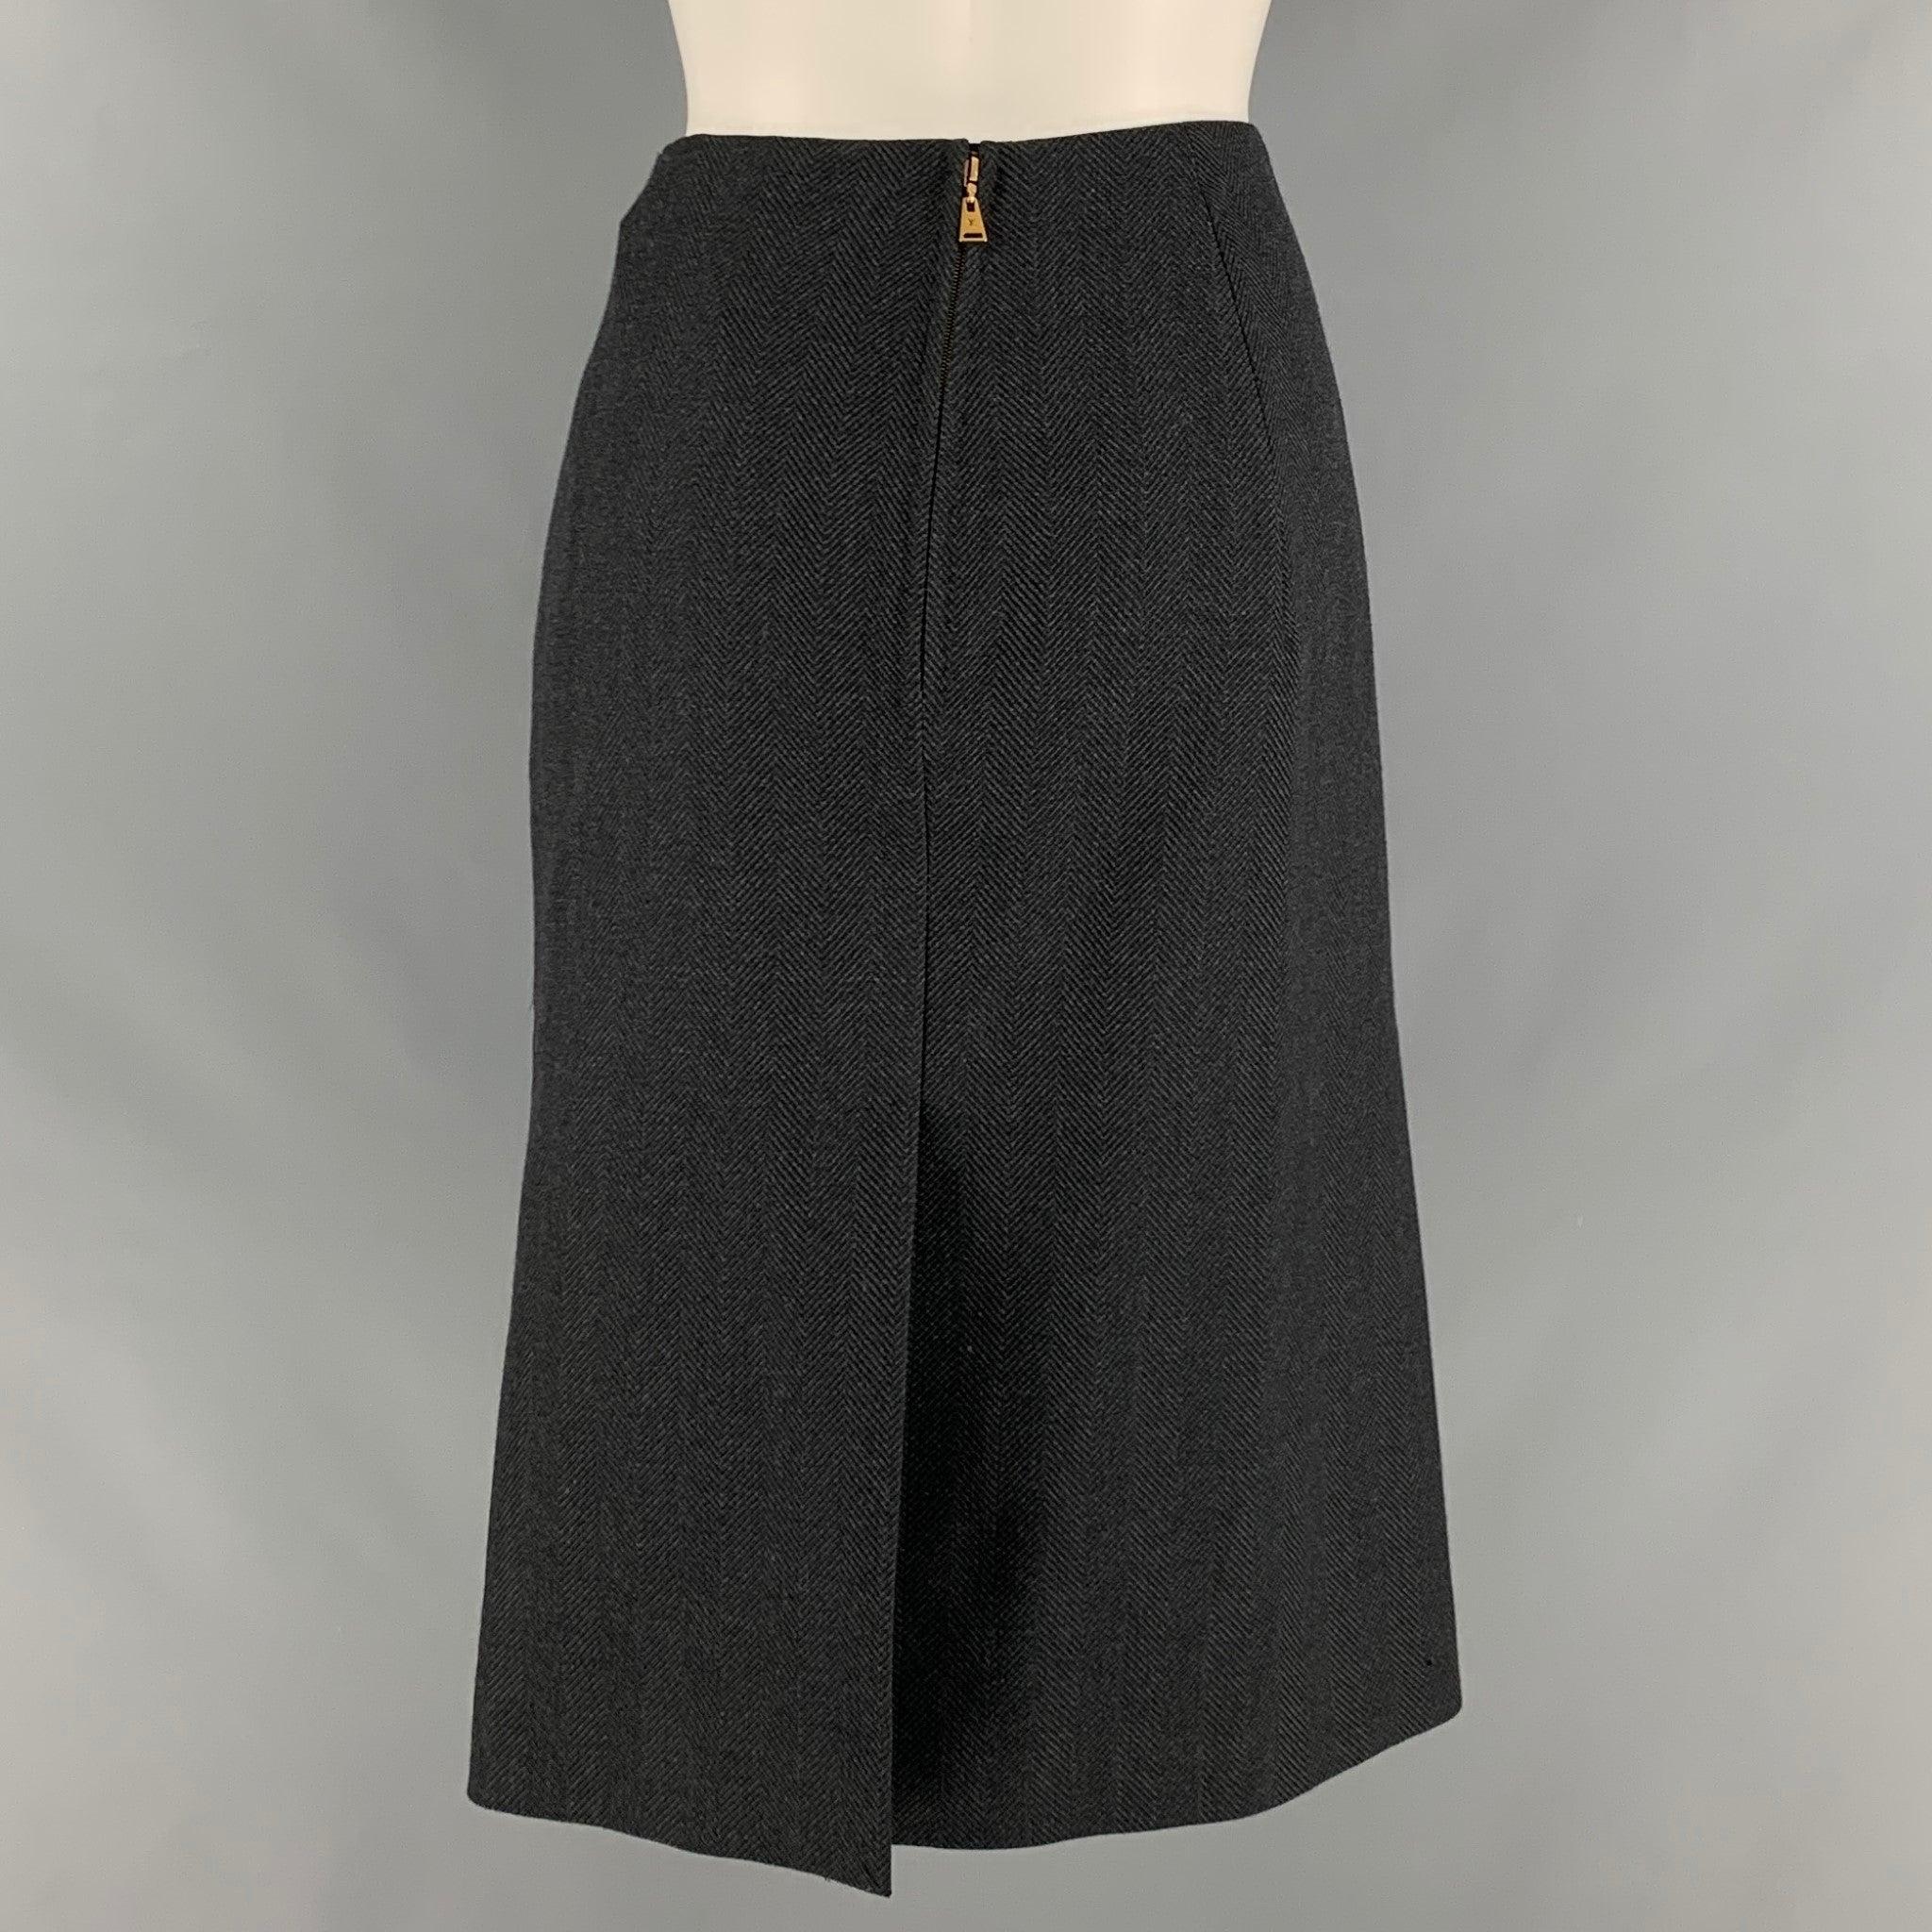 LOUIS VUITTON Size 8 Black Wool Polyester Herringbone Pencil Mid-Calf Skirt In Good Condition For Sale In San Francisco, CA